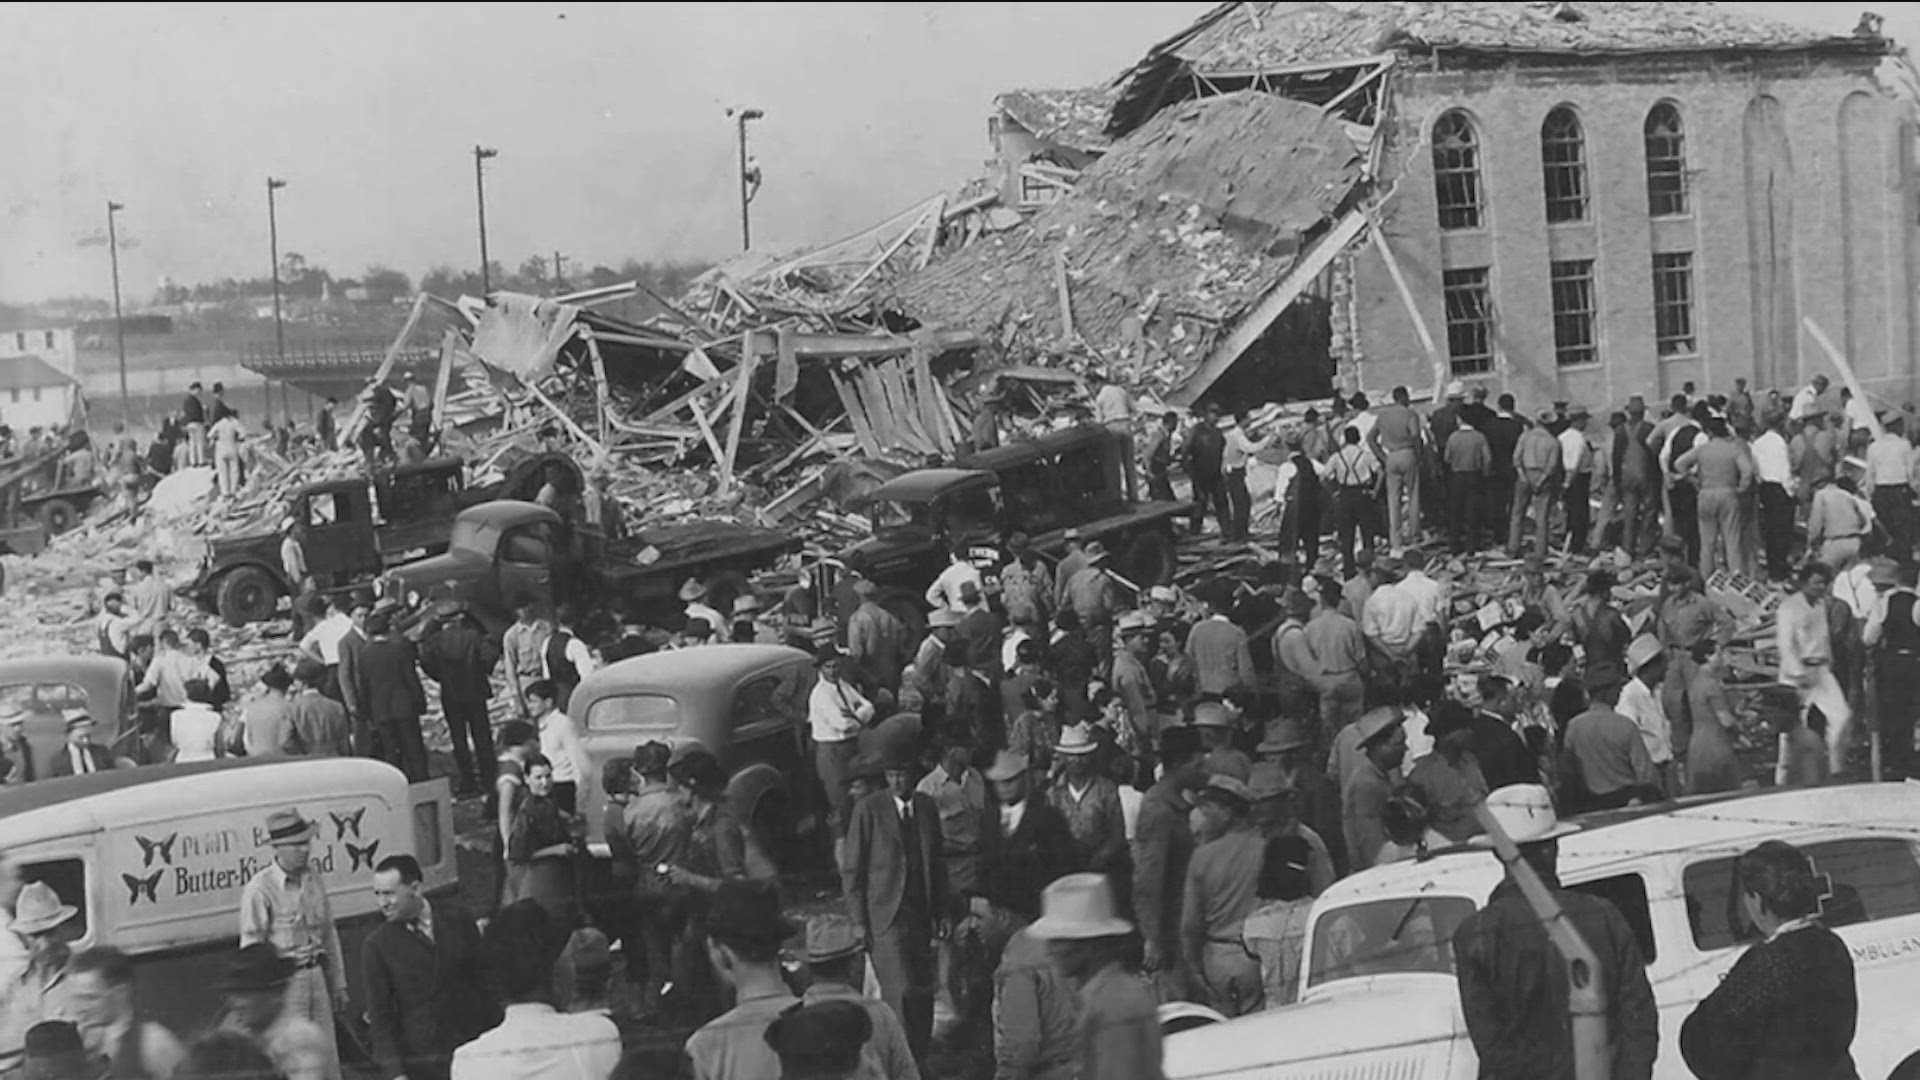 A gas explosion ripped through the school in New London, killing nearly 300 children and their teachers.